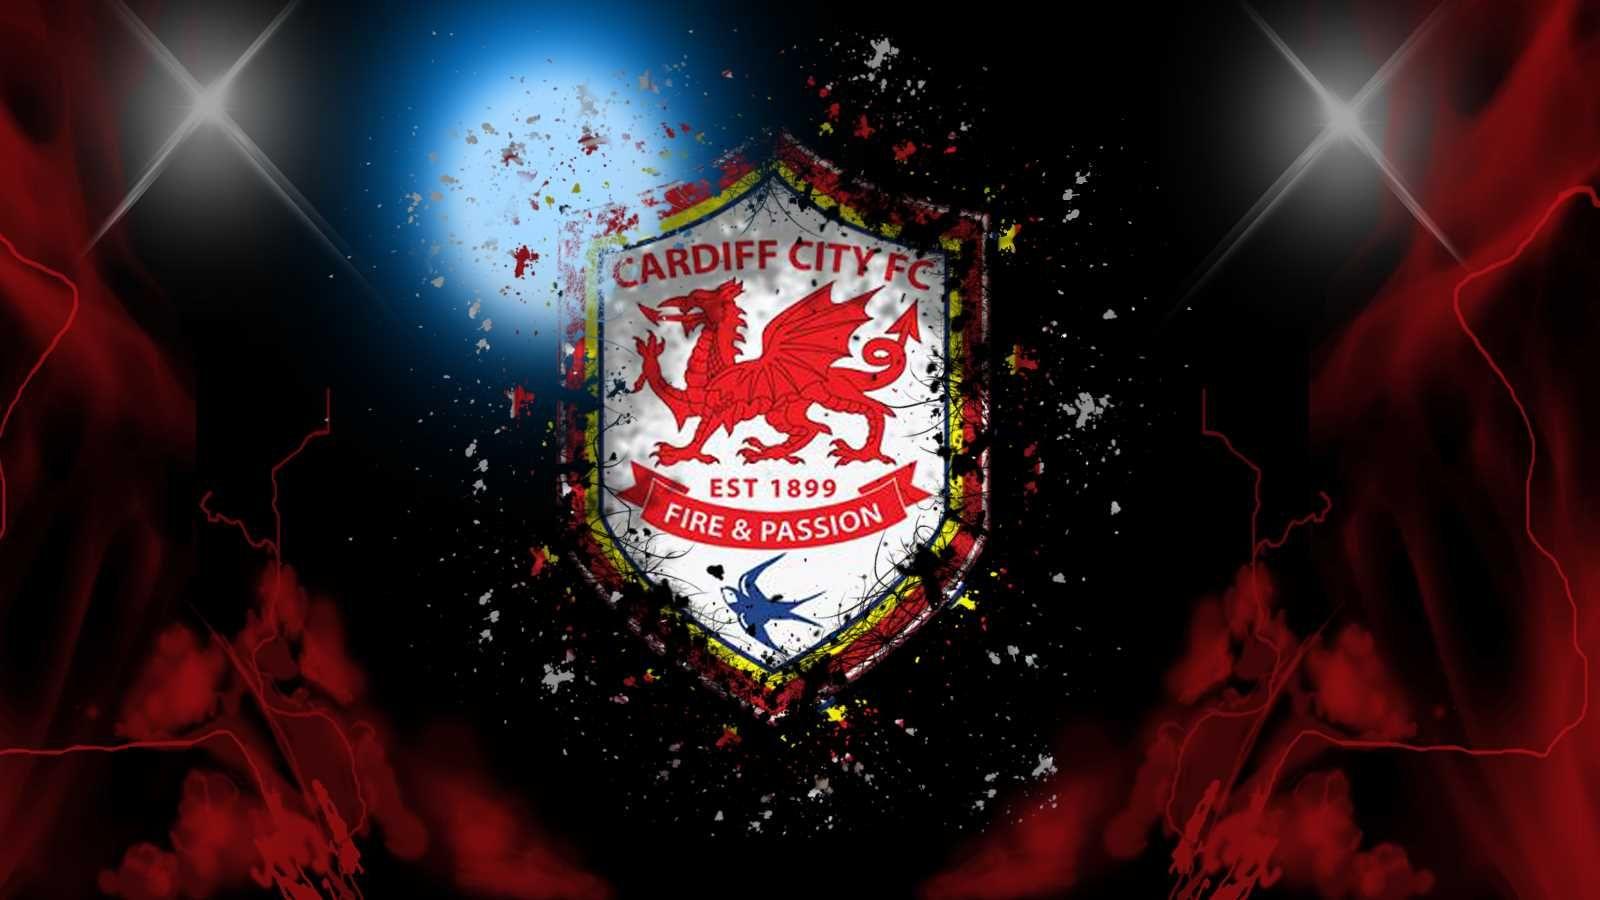 Cardiff City FC Fire and Passion Logo Wallpaper HD. Wallpaper